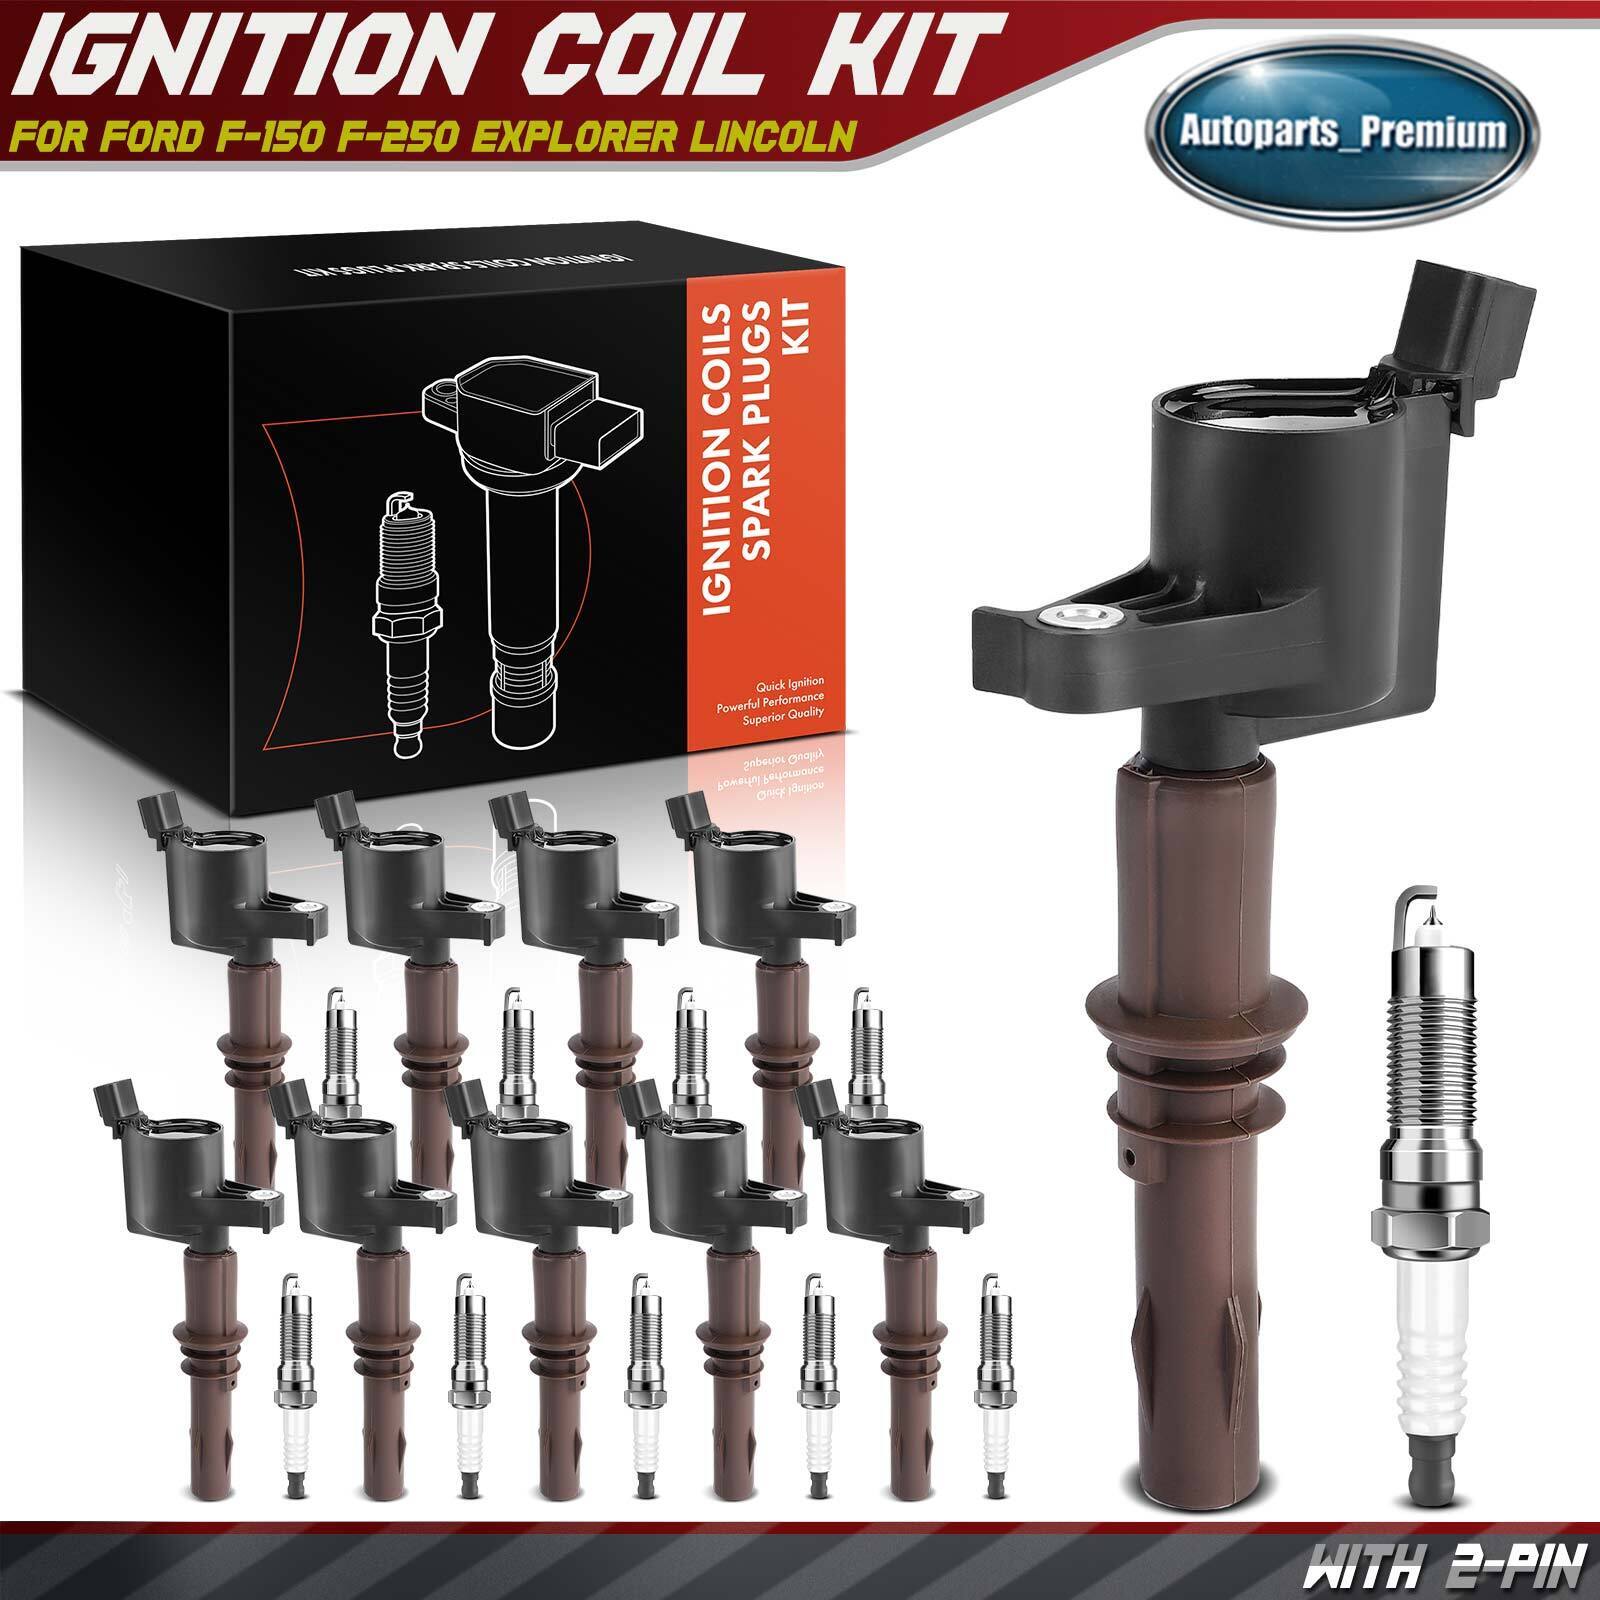 10x Ignition Coil & IRIDIUM Spark Plug Kits for Ford Expedition 2008-2014 F-150